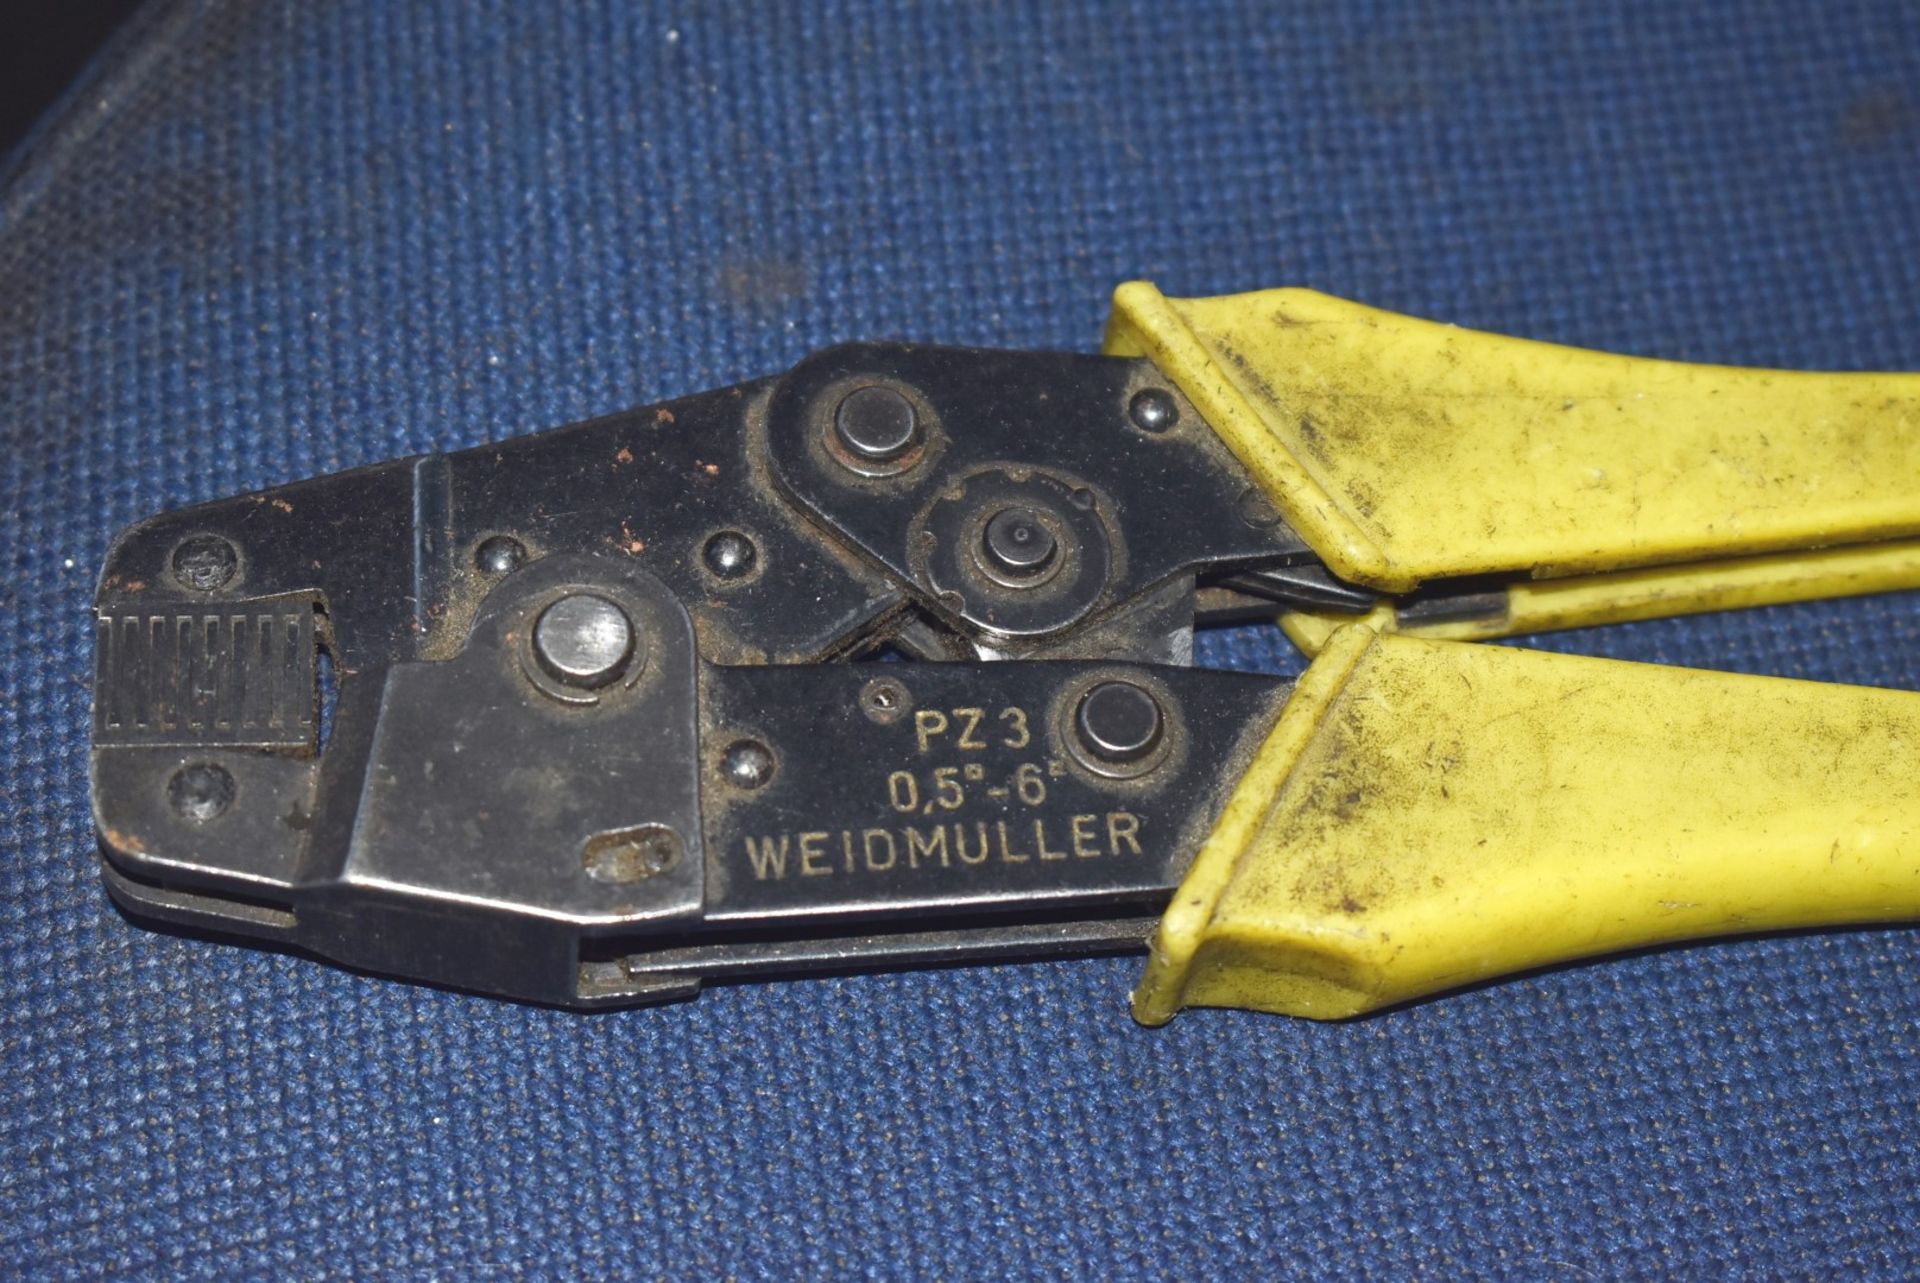 5 x Crimping Hand Tools & Wire Strippers - Burndy MY29B11, Weidmuller PZ4 & PZ3, RS 613044 & More - Image 9 of 10